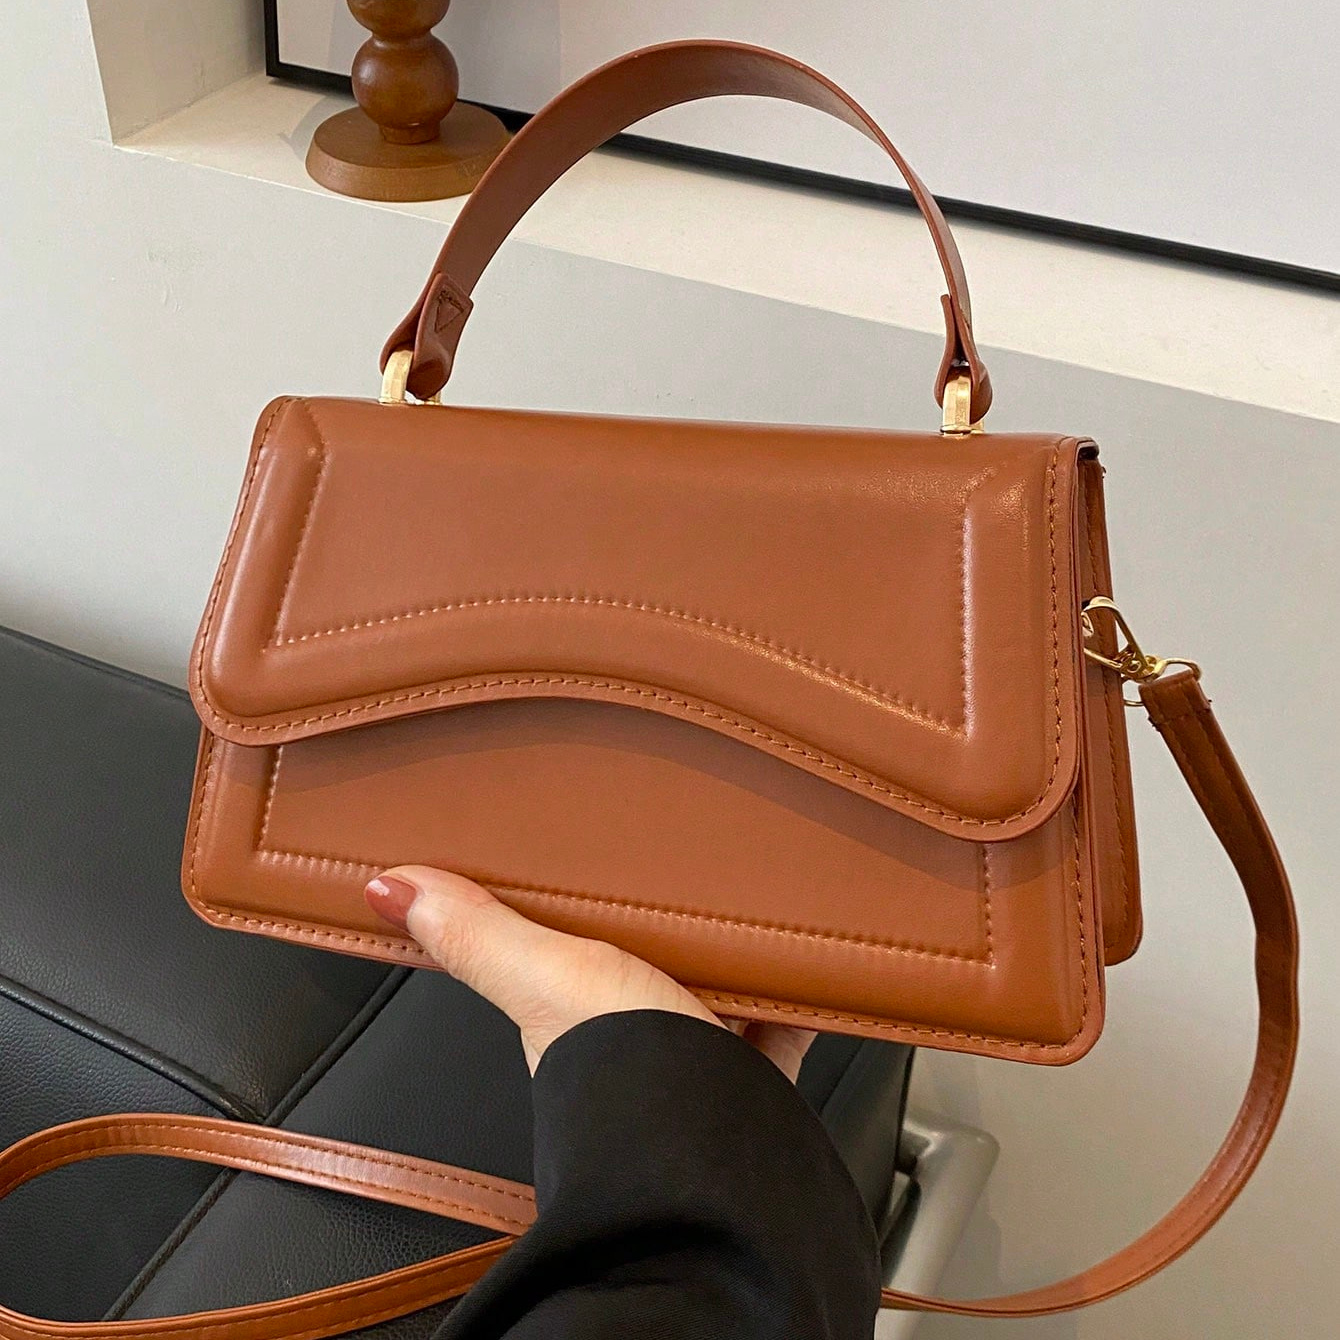 

Newly Designed Women's Brown Solid Color Small Square Handbag, Classic & Fashionable Shoulder Bag With Detachable & Adjustable Strap For Casual & Party Use